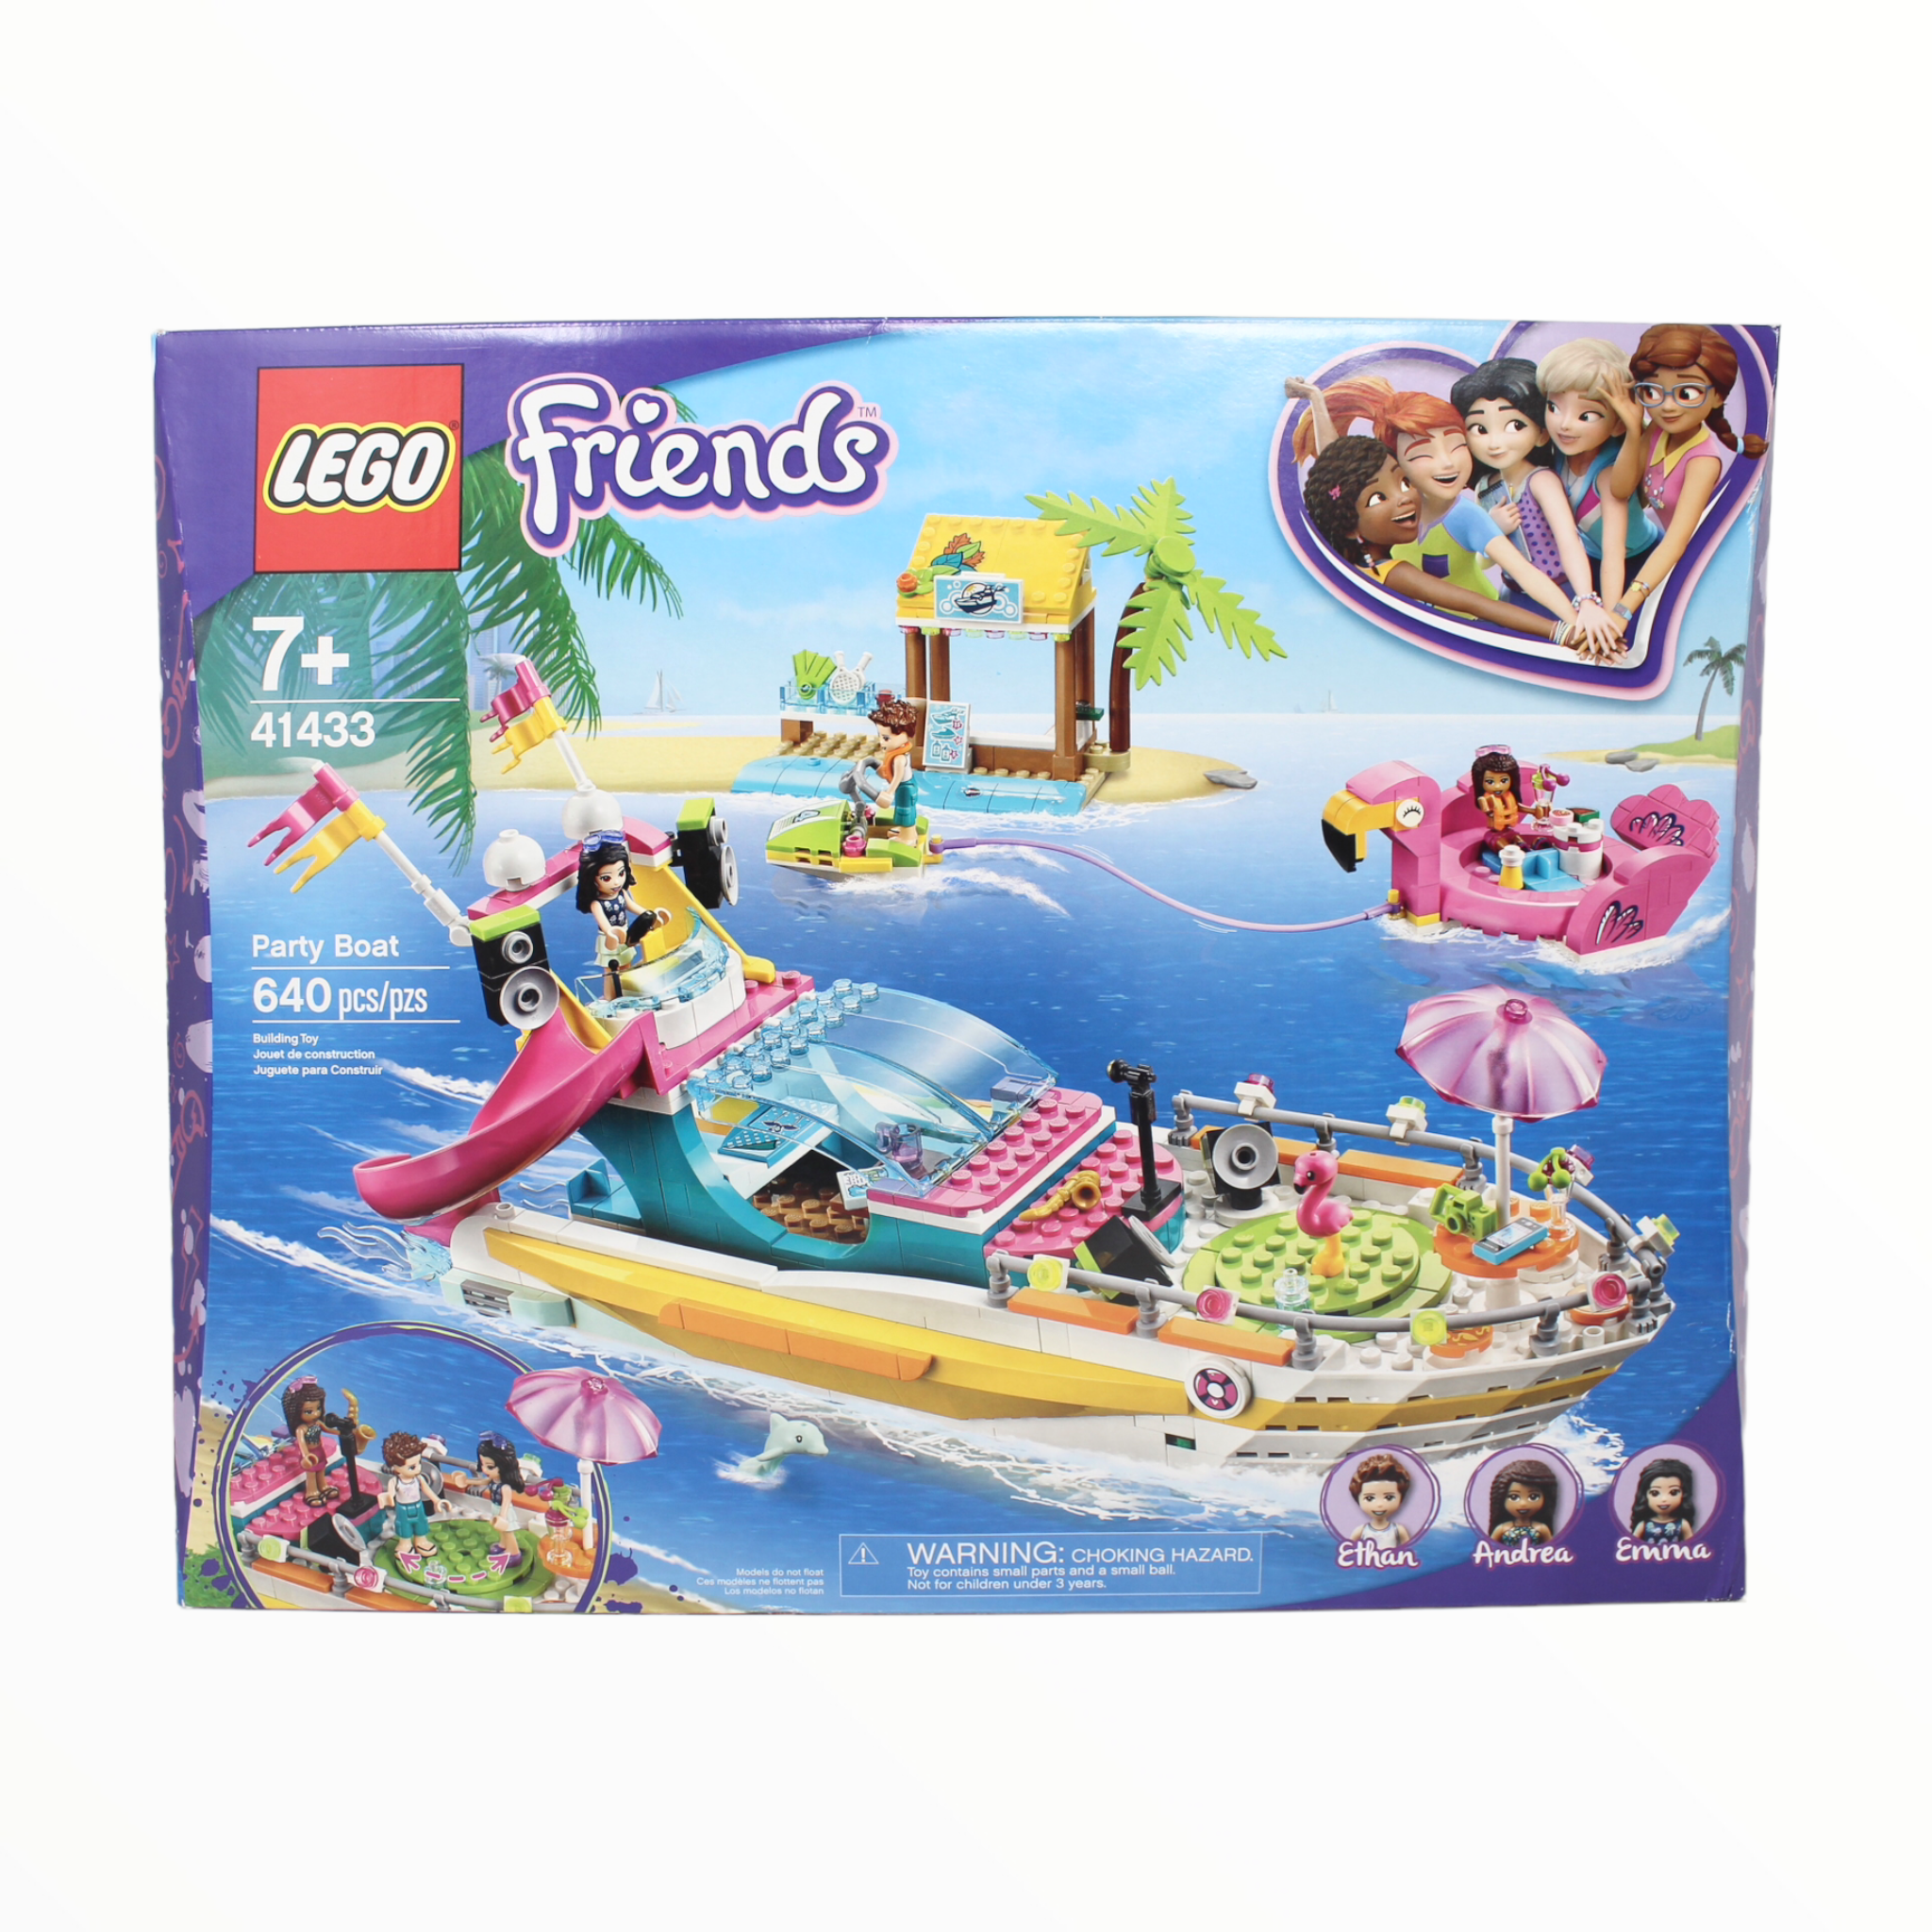 Retired Set 41433 Friends Party Boat